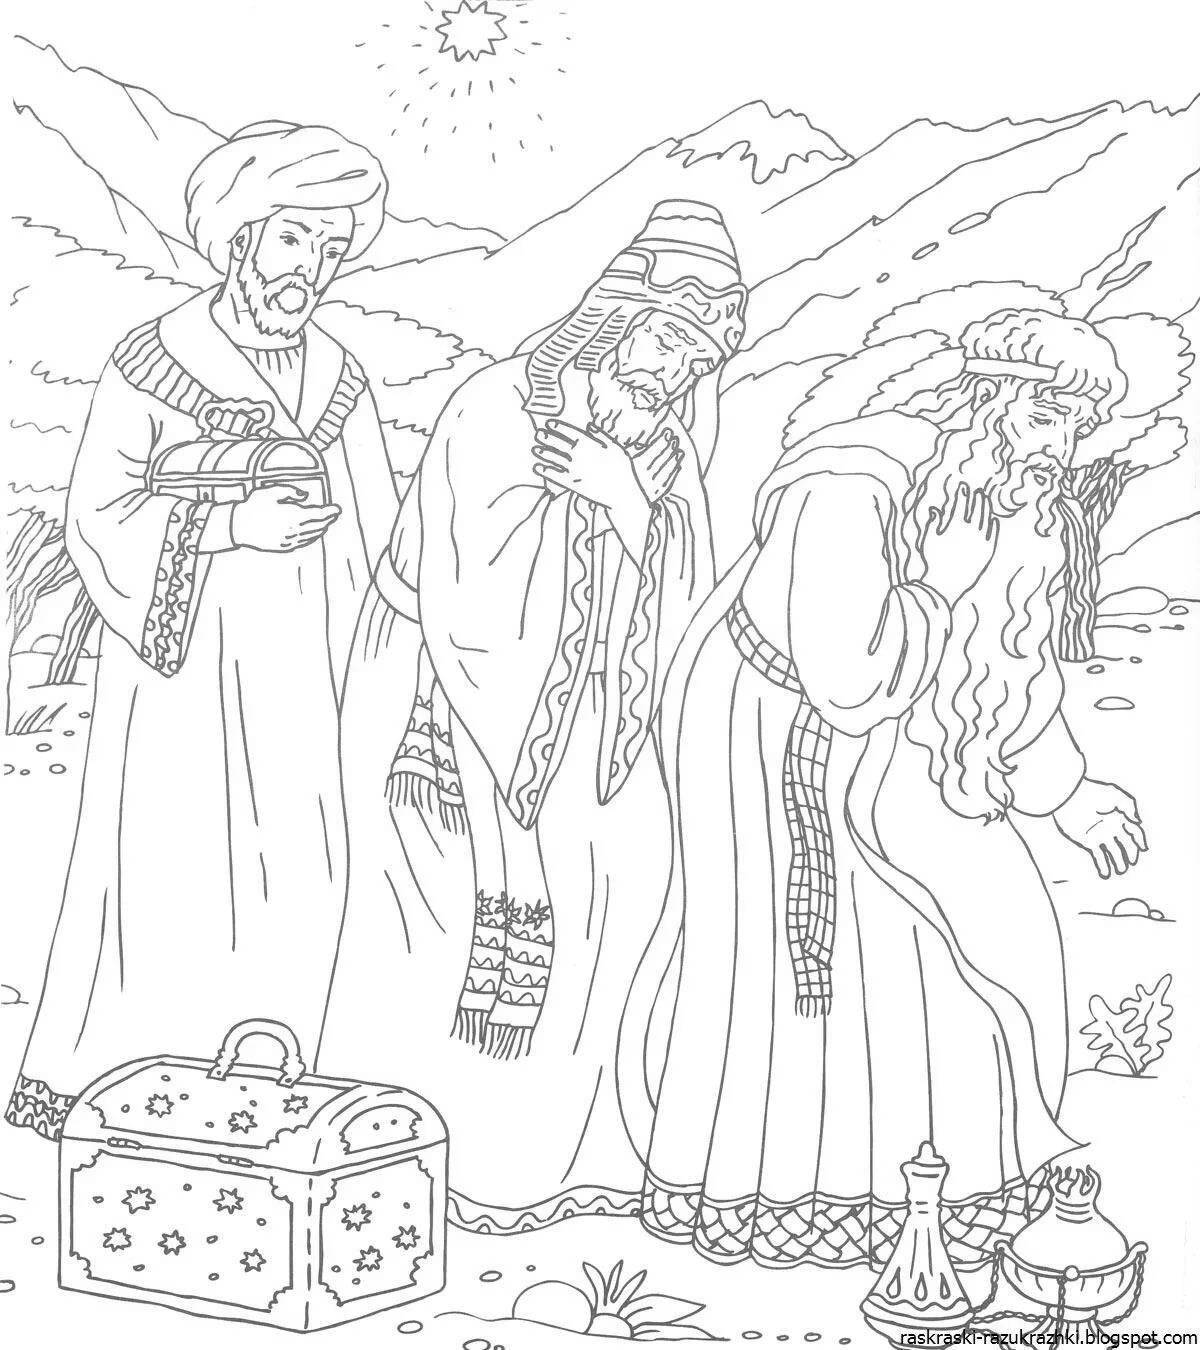 Nauryz holiday coloring page with colorful splashes